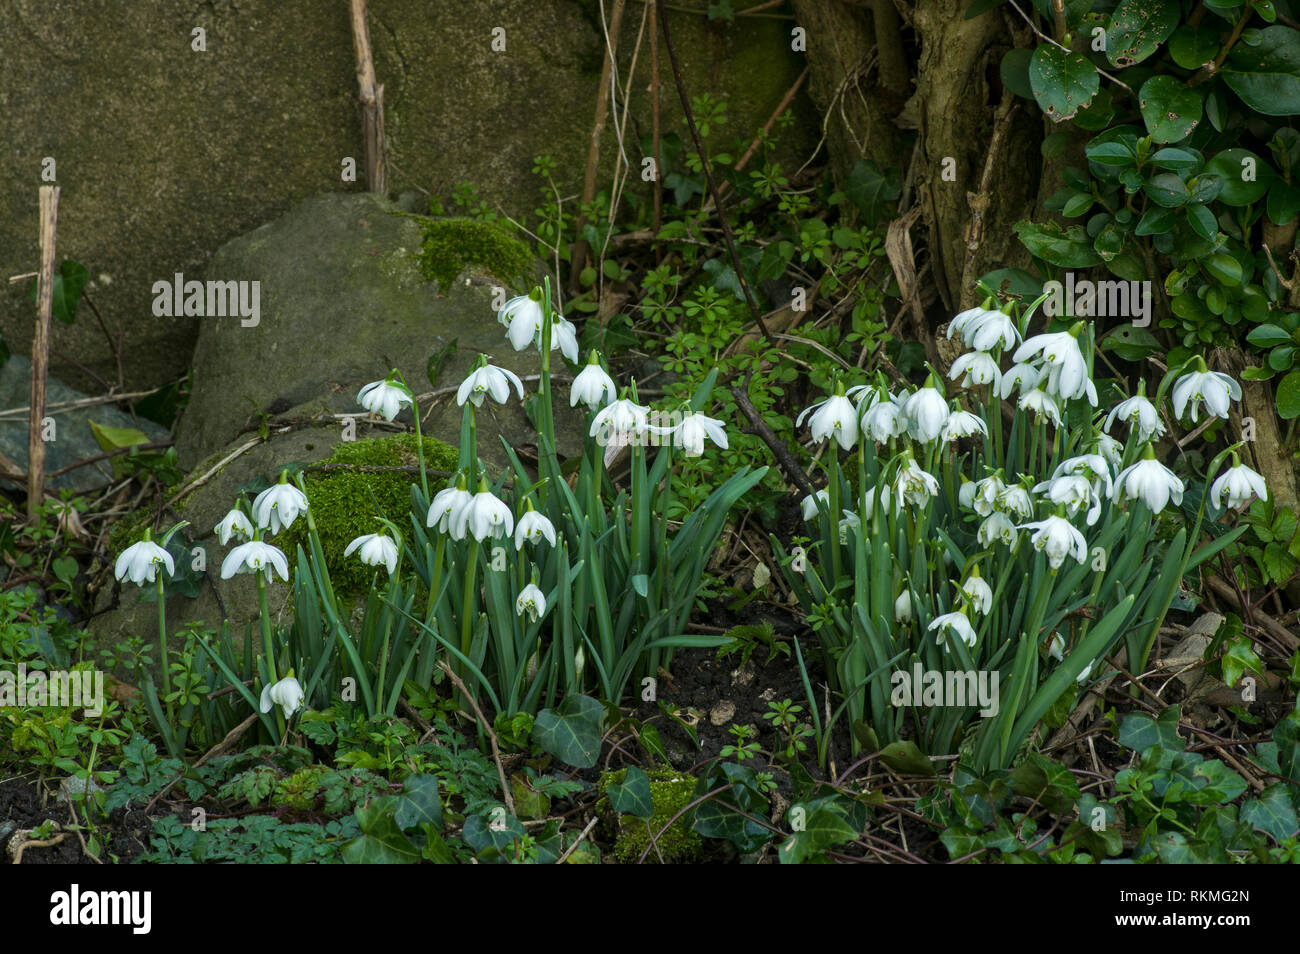 These early flowering plants are welcome in mid winter. Stock Photo